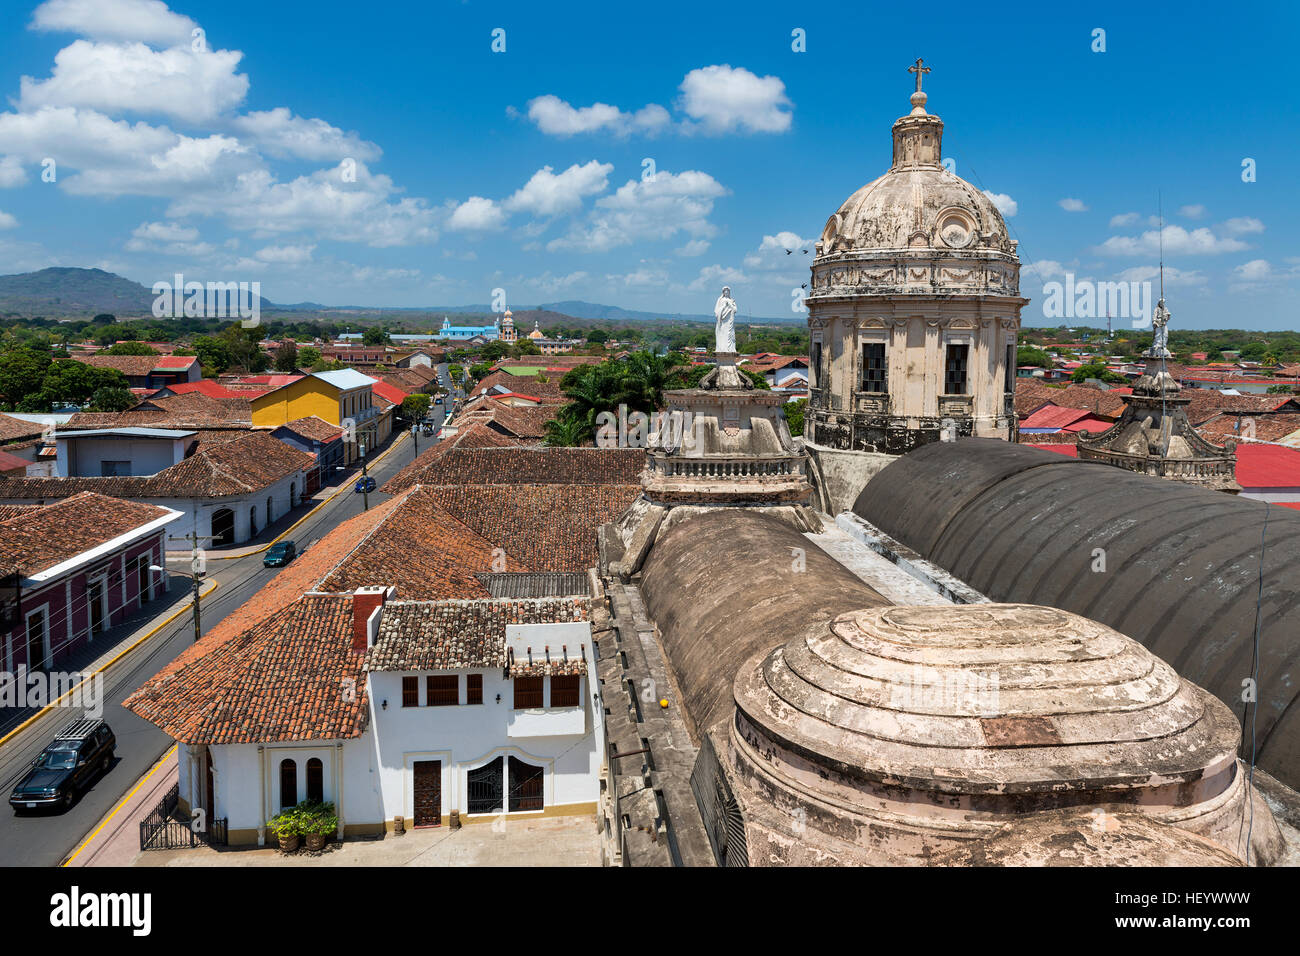 View of the colonial city of Granada in Nicaragua, Central America, from the rooftop of the La Merced Church (Iglesia de La Merced) Stock Photo